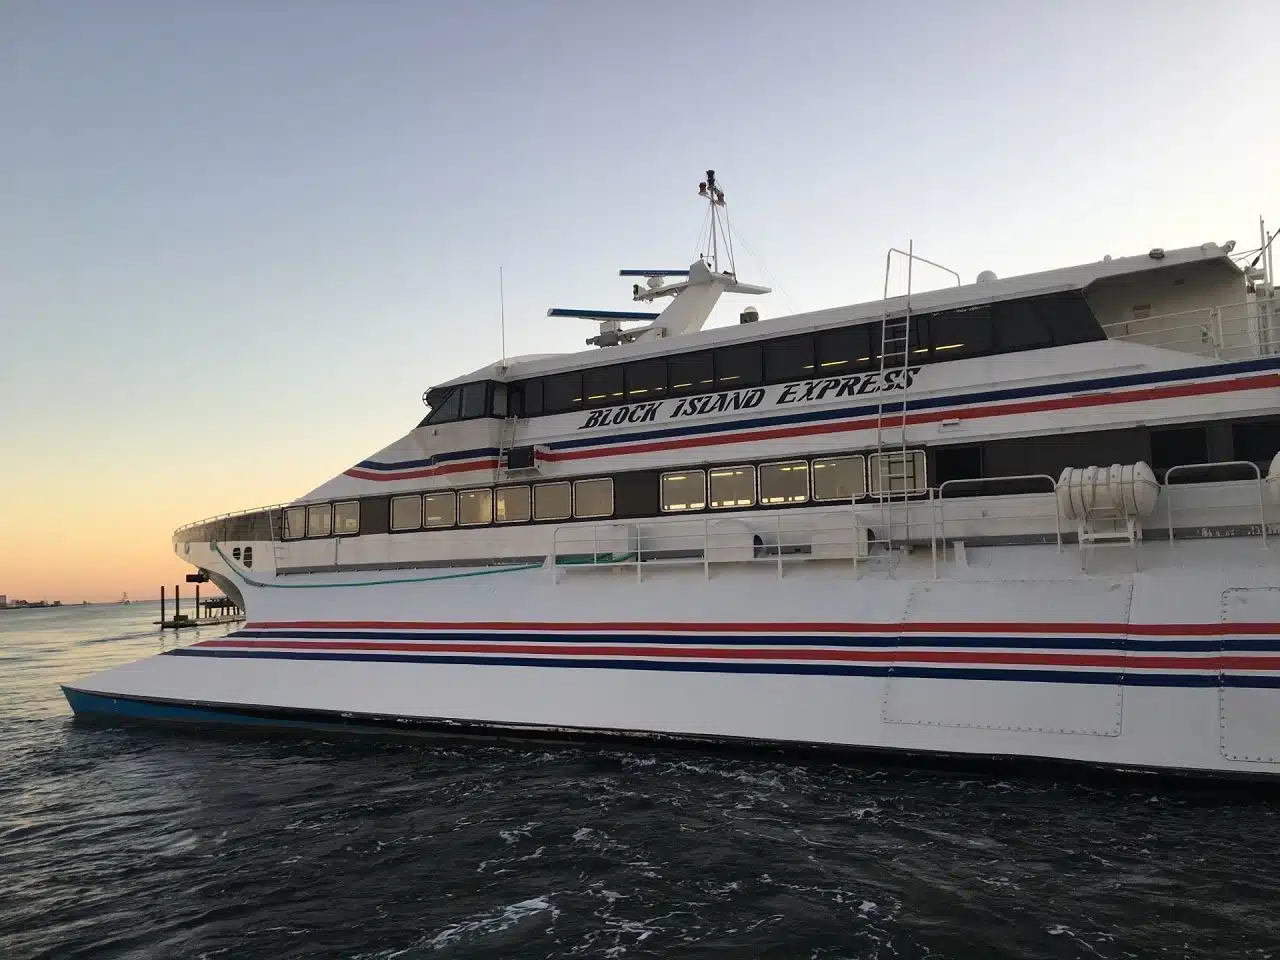 Block Island Express Ferry provides service from Long Island or Connecticut to Block Island via high speed ferrys